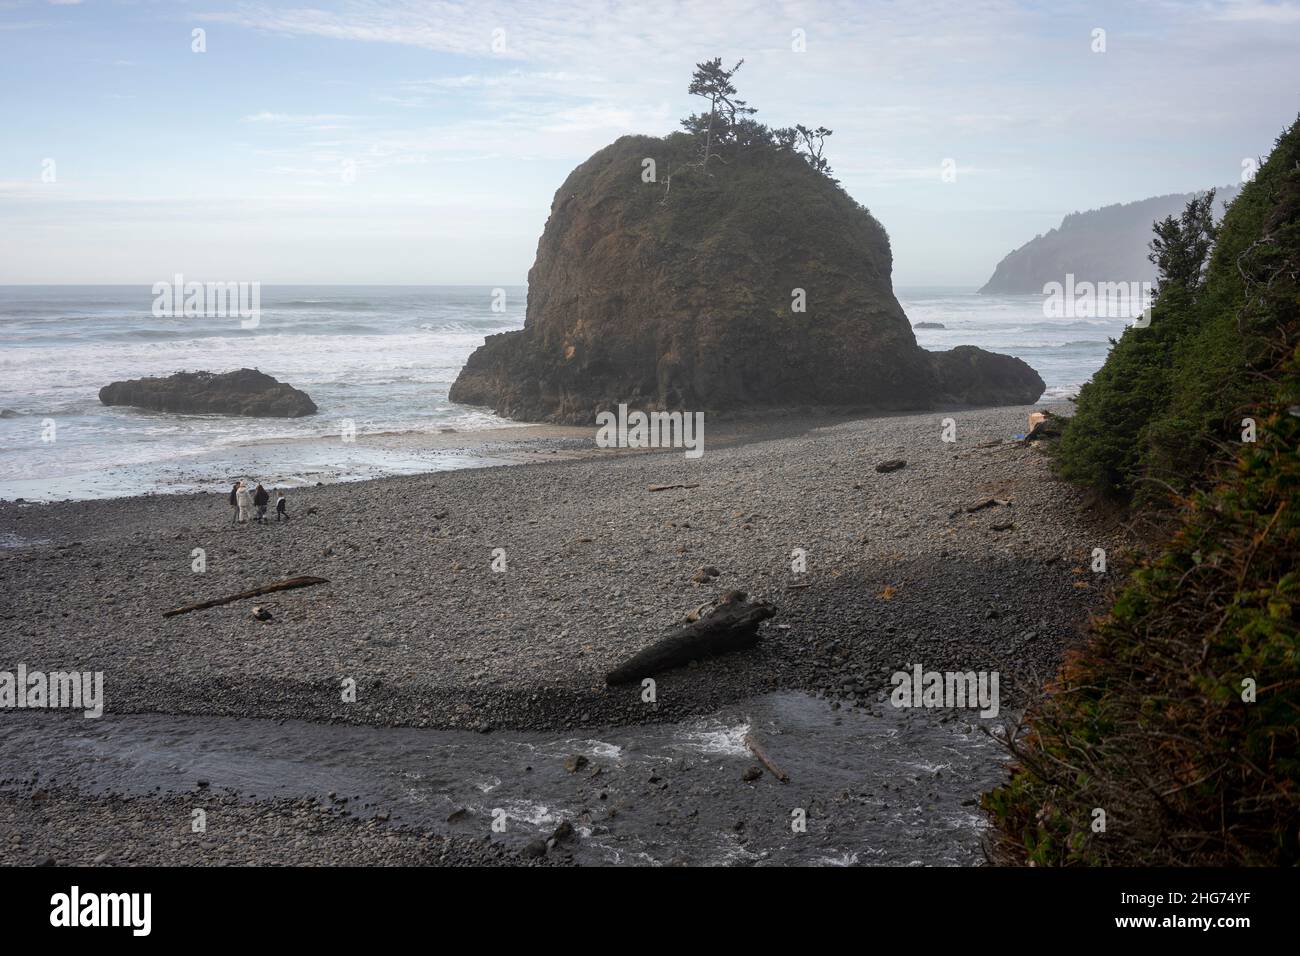 The Short Beach on the North Oregon Coast, with a sea stack, creeks, and waterfalls. Stock Photo